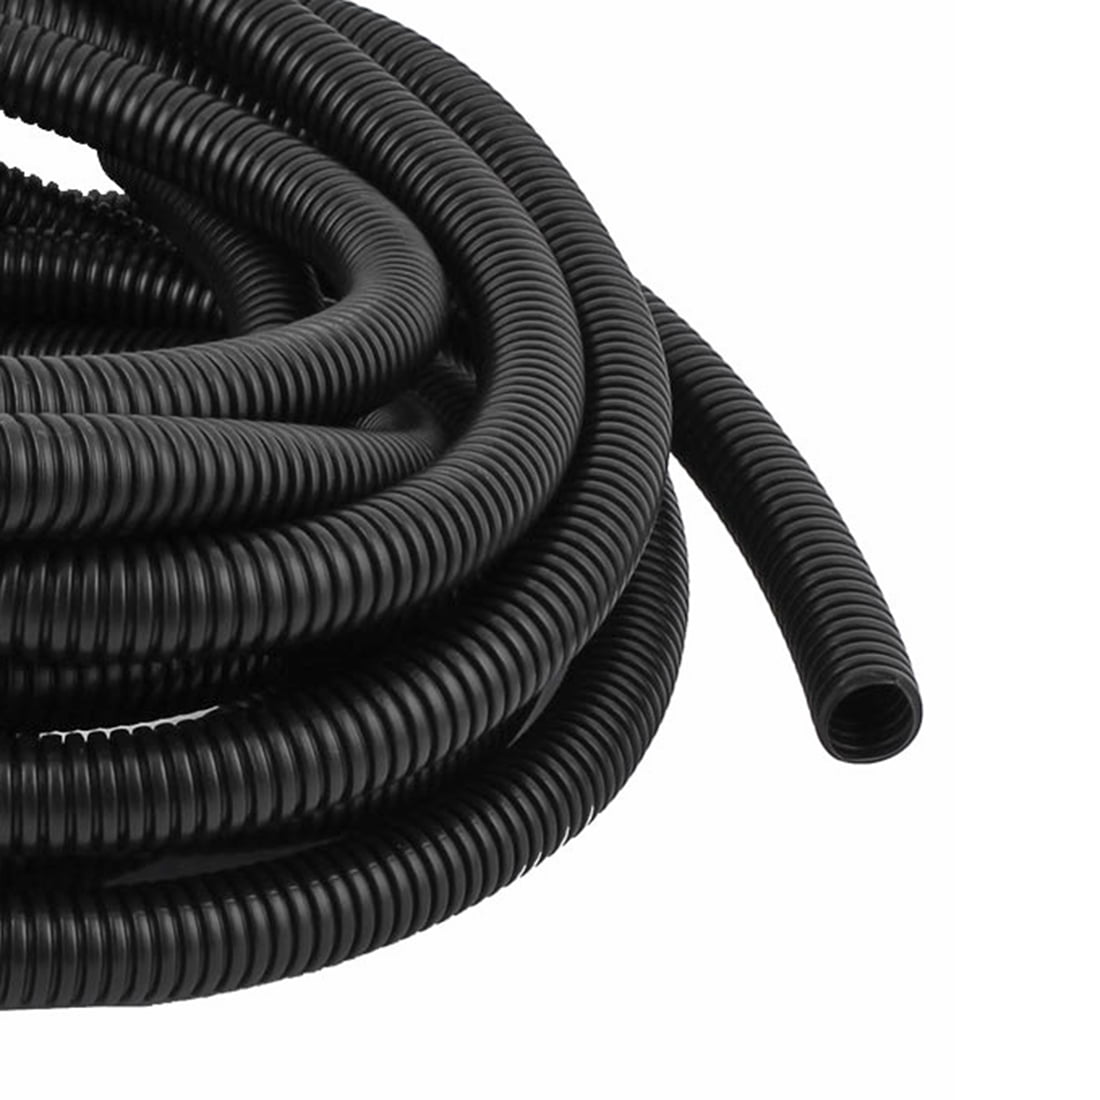 Uxcell 2 Meters Metal Flexible Corrugated Tubing Wire Cable Conduit Tube Pipe 20 x 23mm